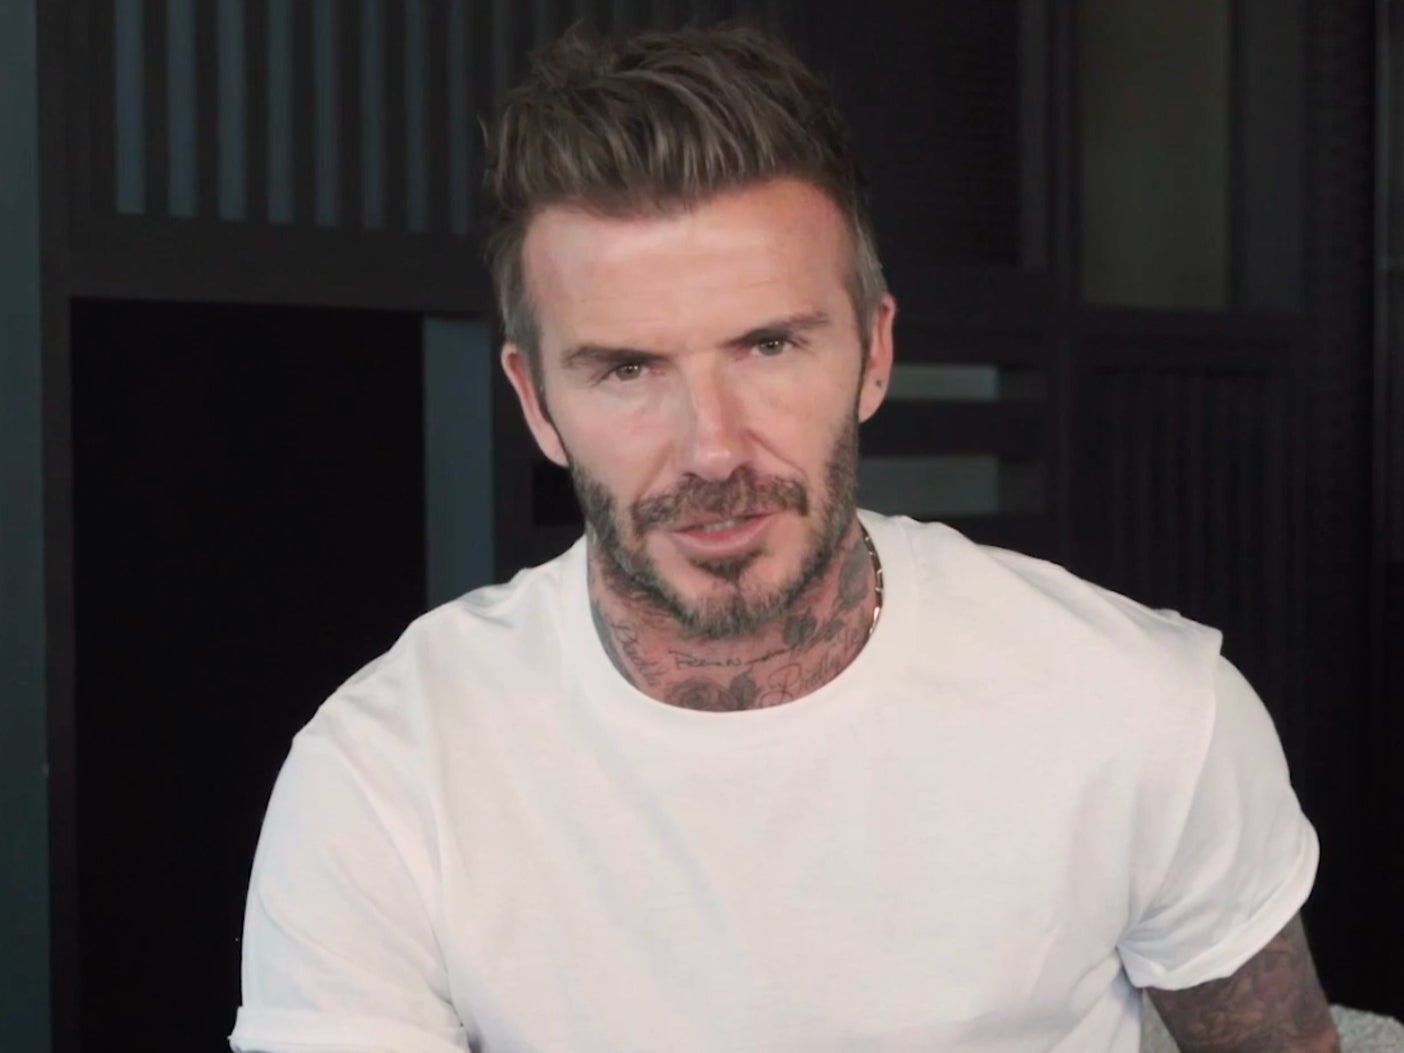 David Beckham backs campaign for computer access during lockdown